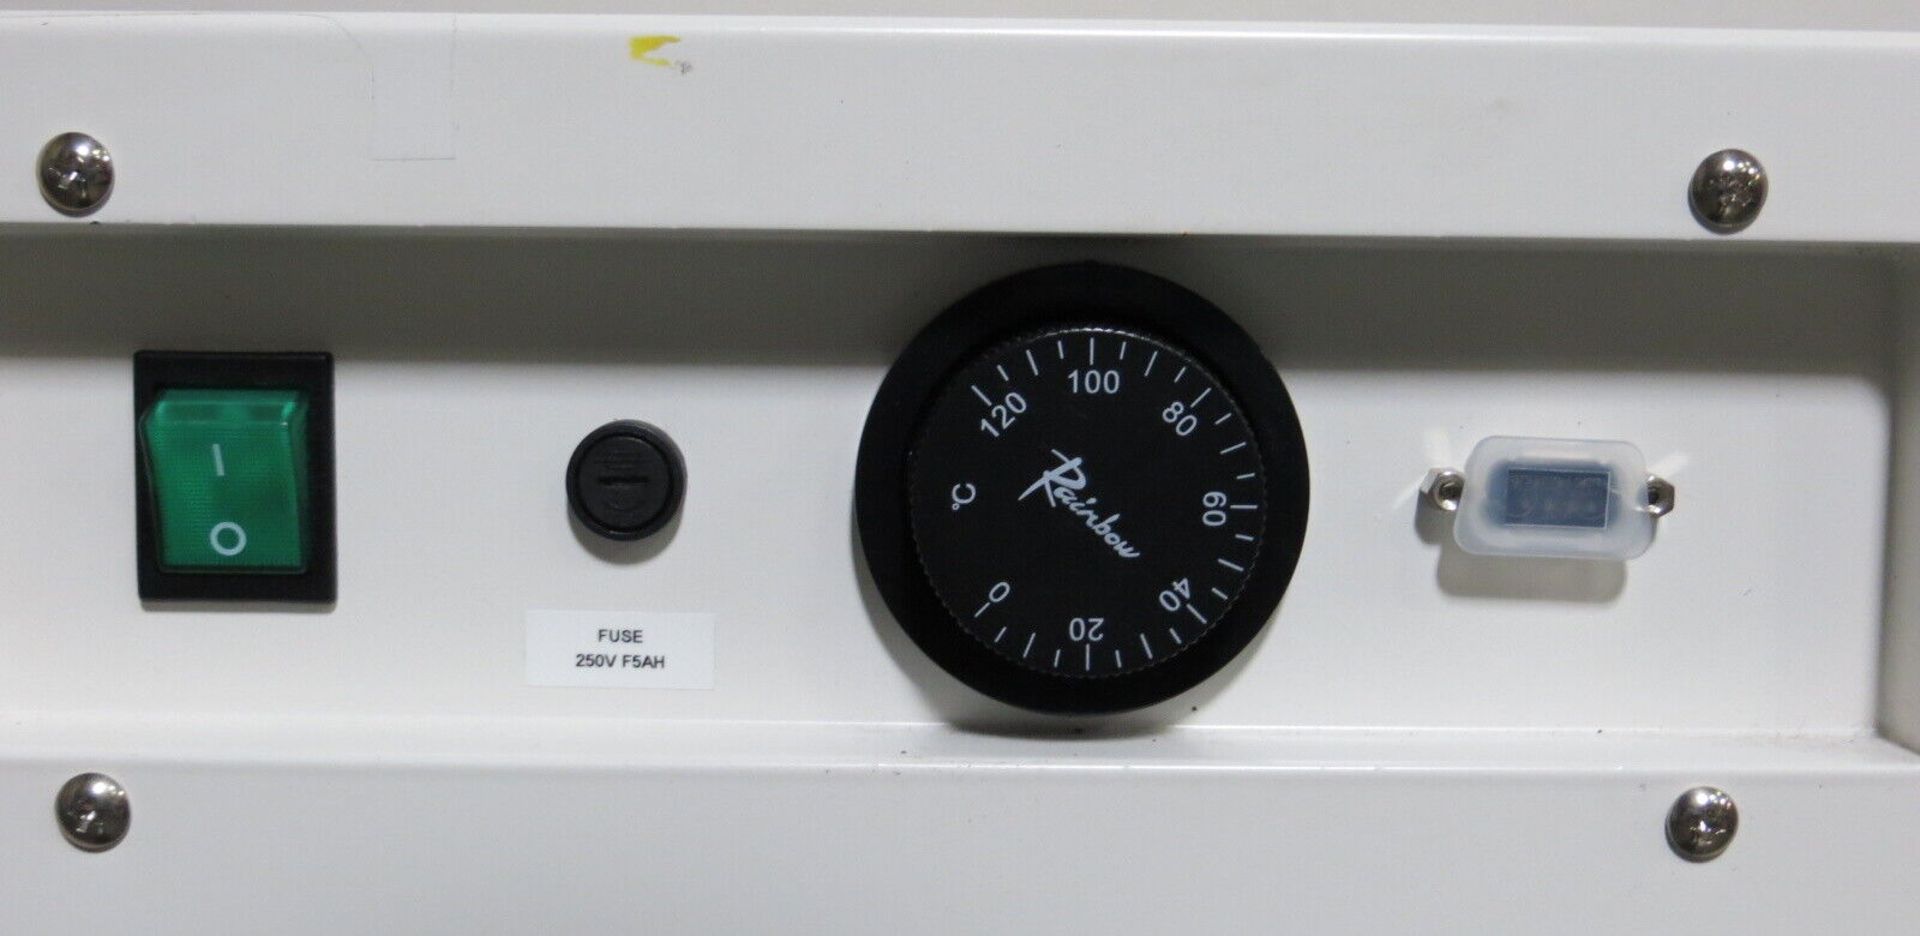 VWR 414005-132 Gravity Convection General Incubator - Image 8 of 9